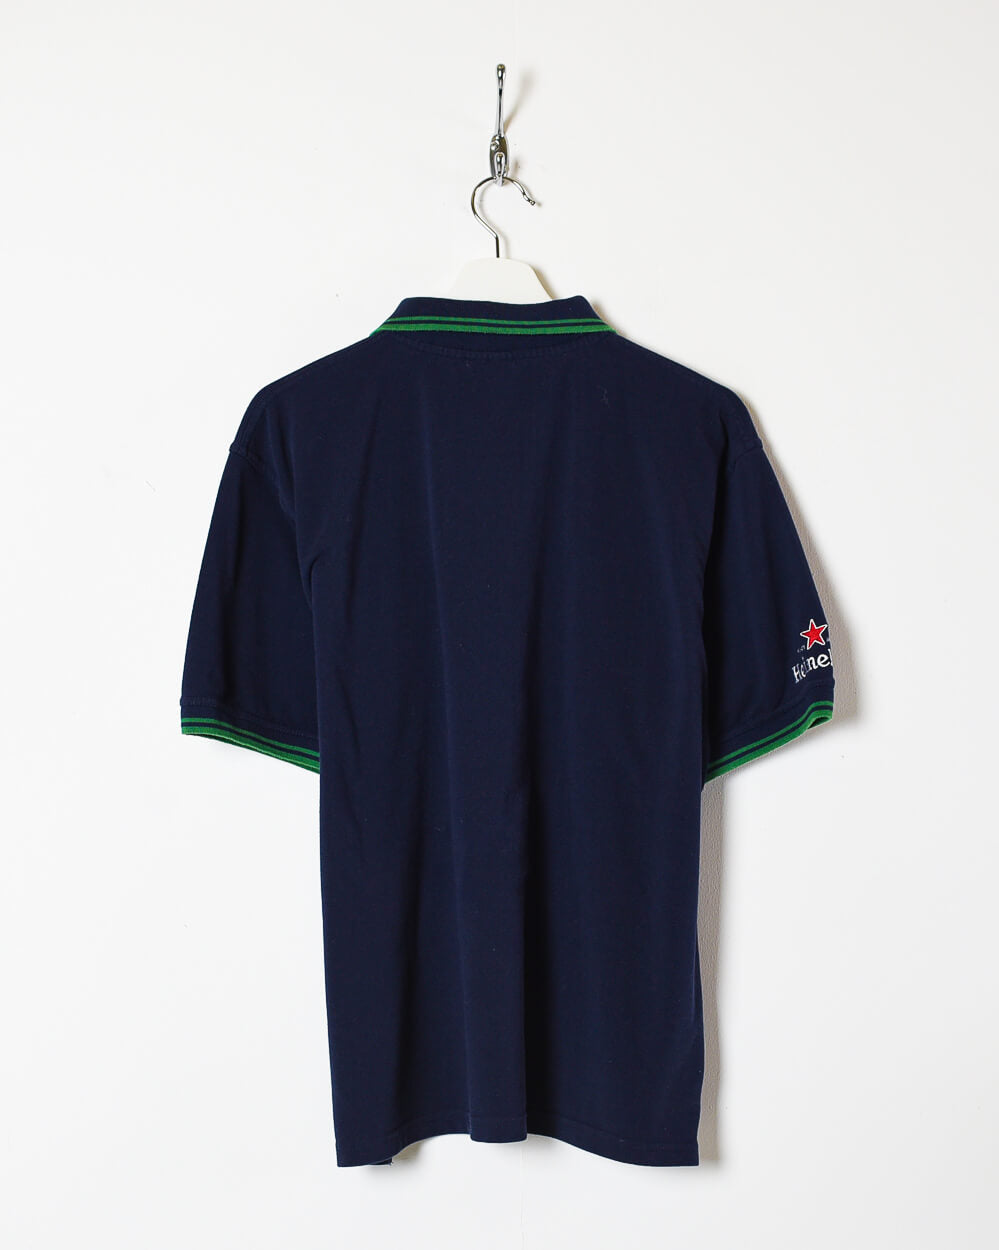 Navy Heineken Rugby World Cup 2015 Polo Shirt - Large